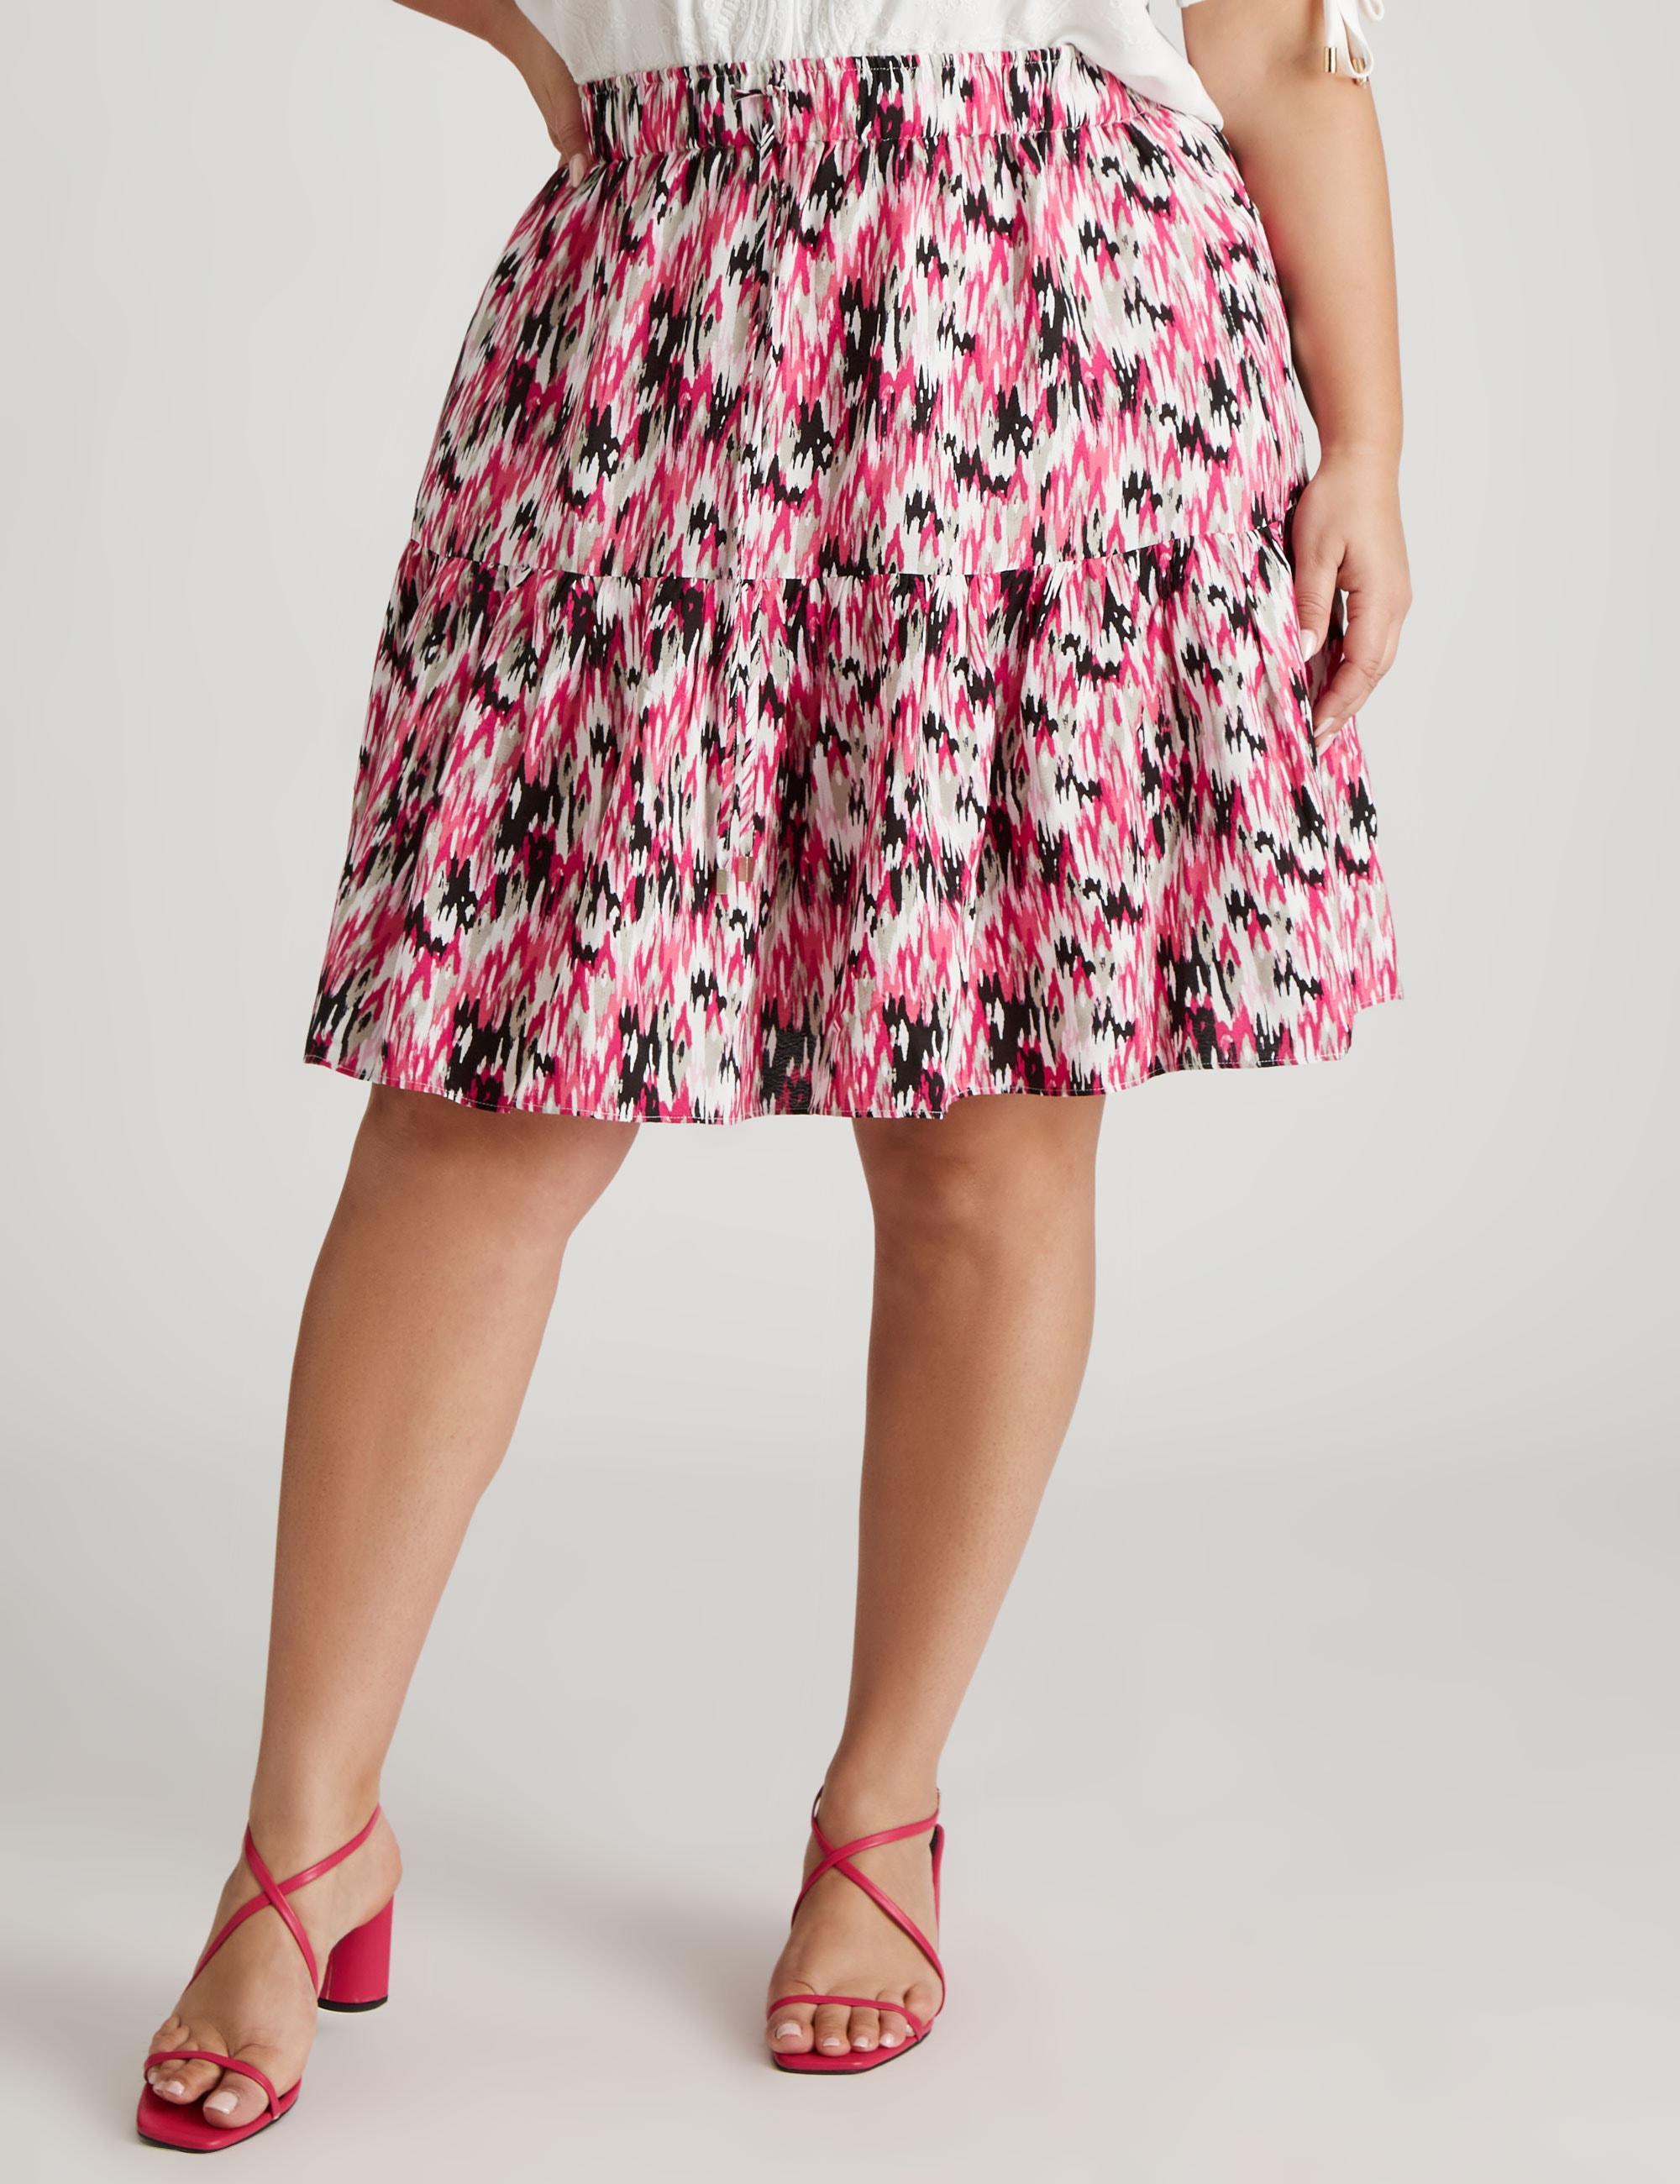 BeMe - Plus Size - Womens Skirts - Midi - Summer - Pink - A Line - Work Clothes - Woven - Thigh Tiered - Knee Length - Casual Fashion - Office Wear